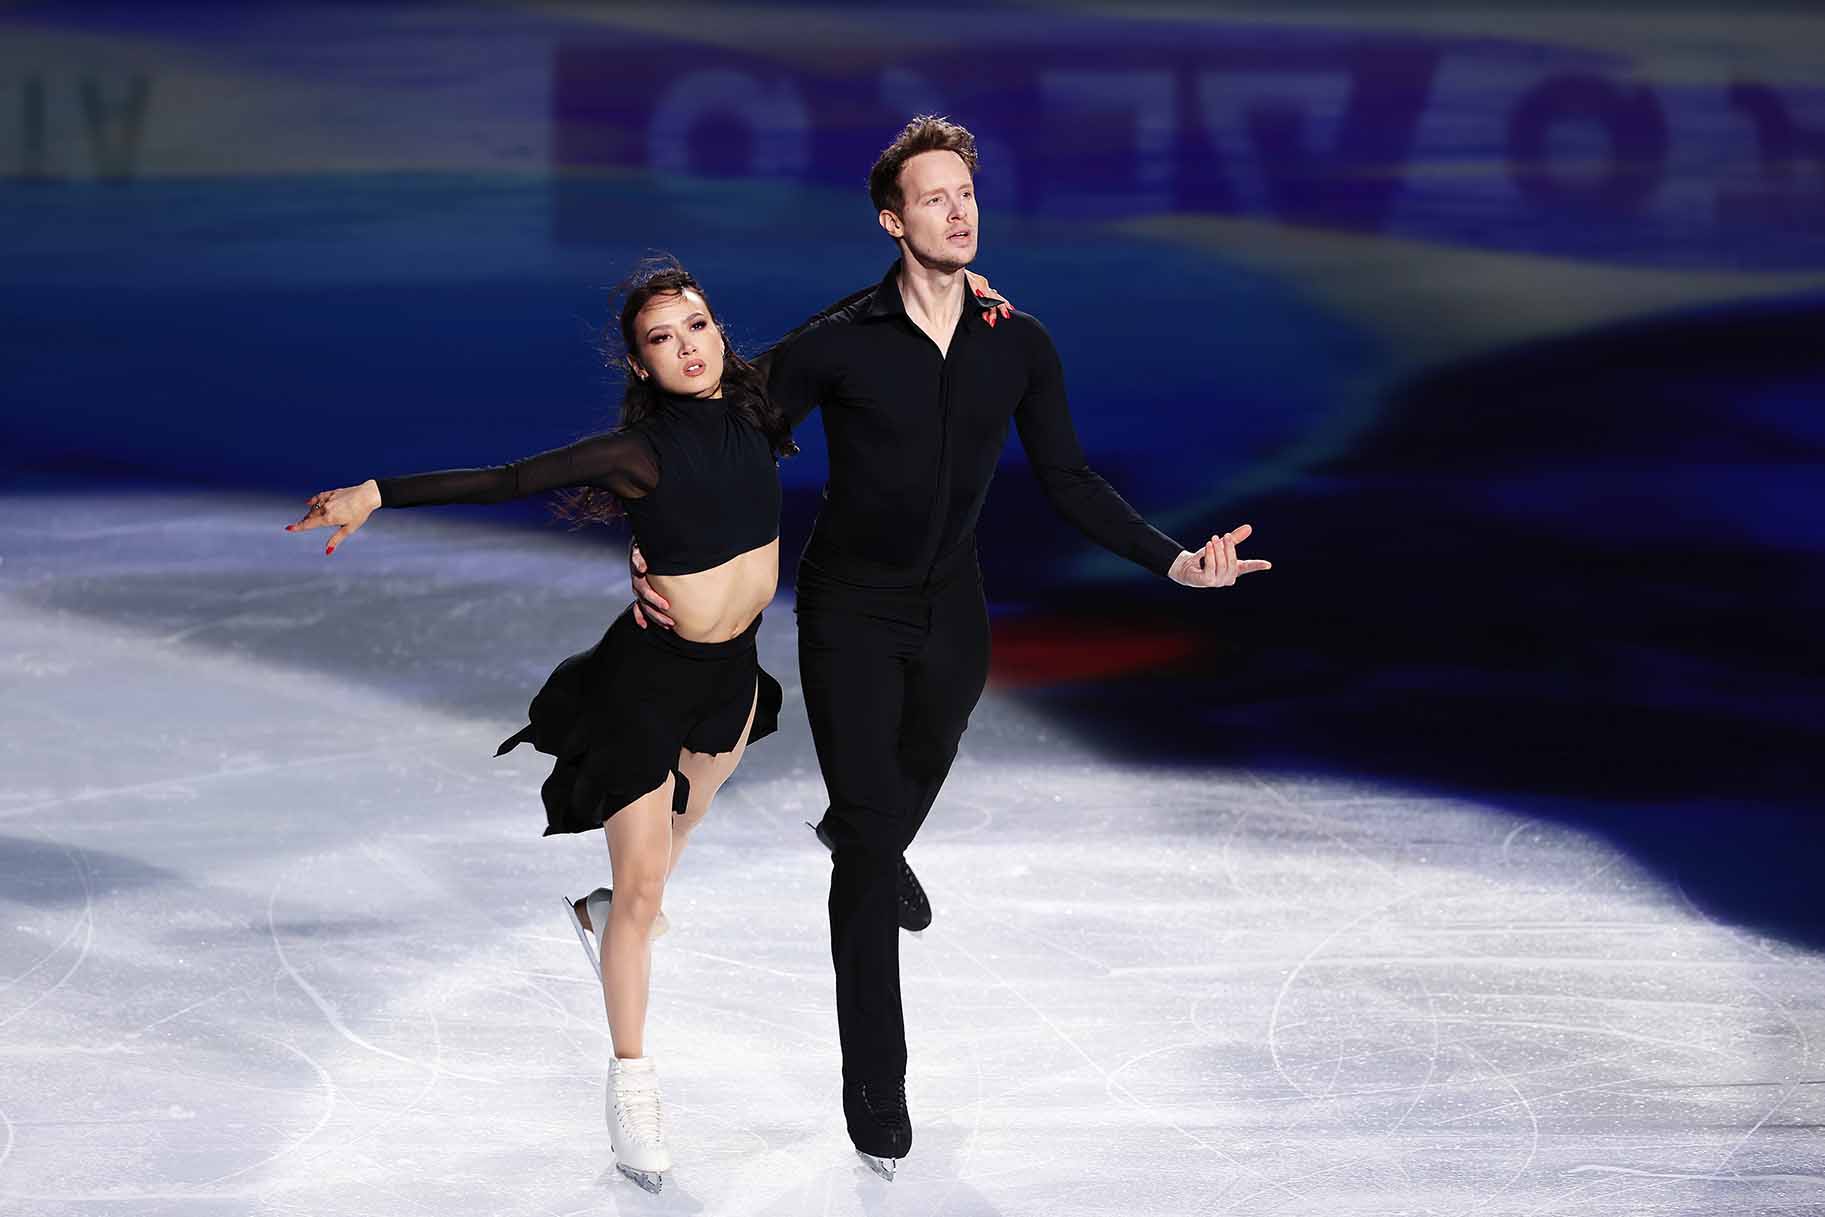 Eleven Team USA Athletes to Compete at Cup of China - U.S. Figure